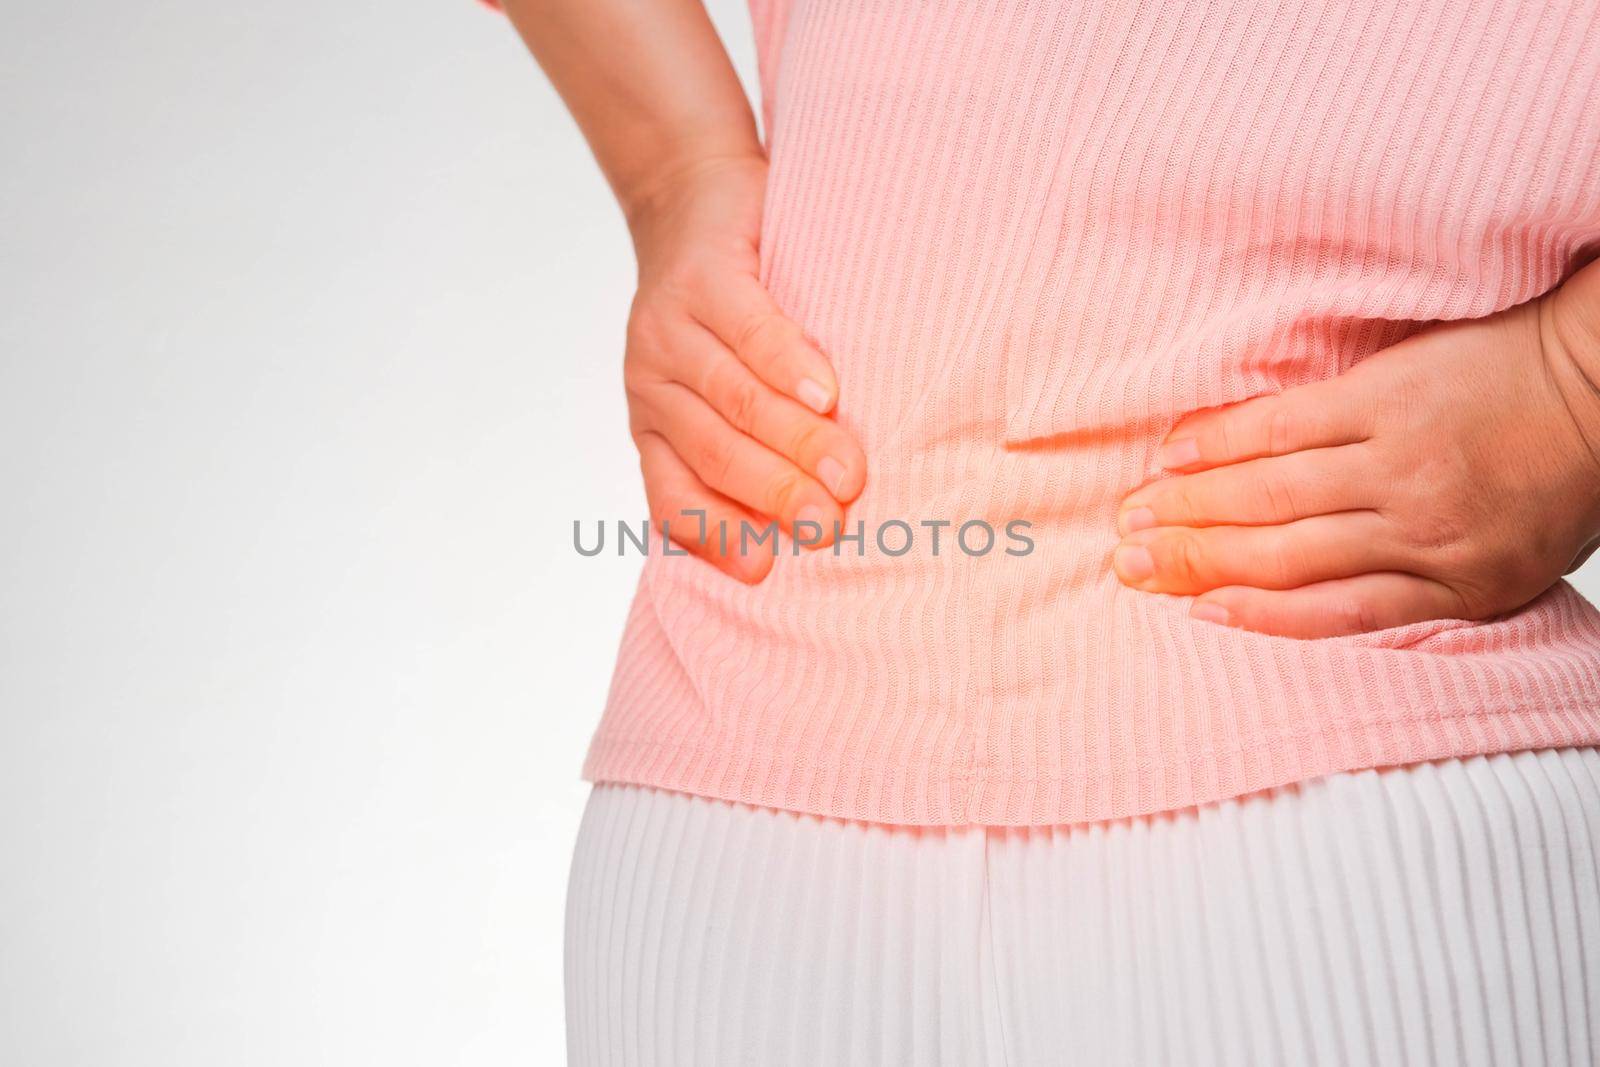 Back view of woman suffering from backache, waist pain, muscle or chronic nerve pain in her back after working. close up. Health problems, concepts of diseases of the musculoskeletal system.